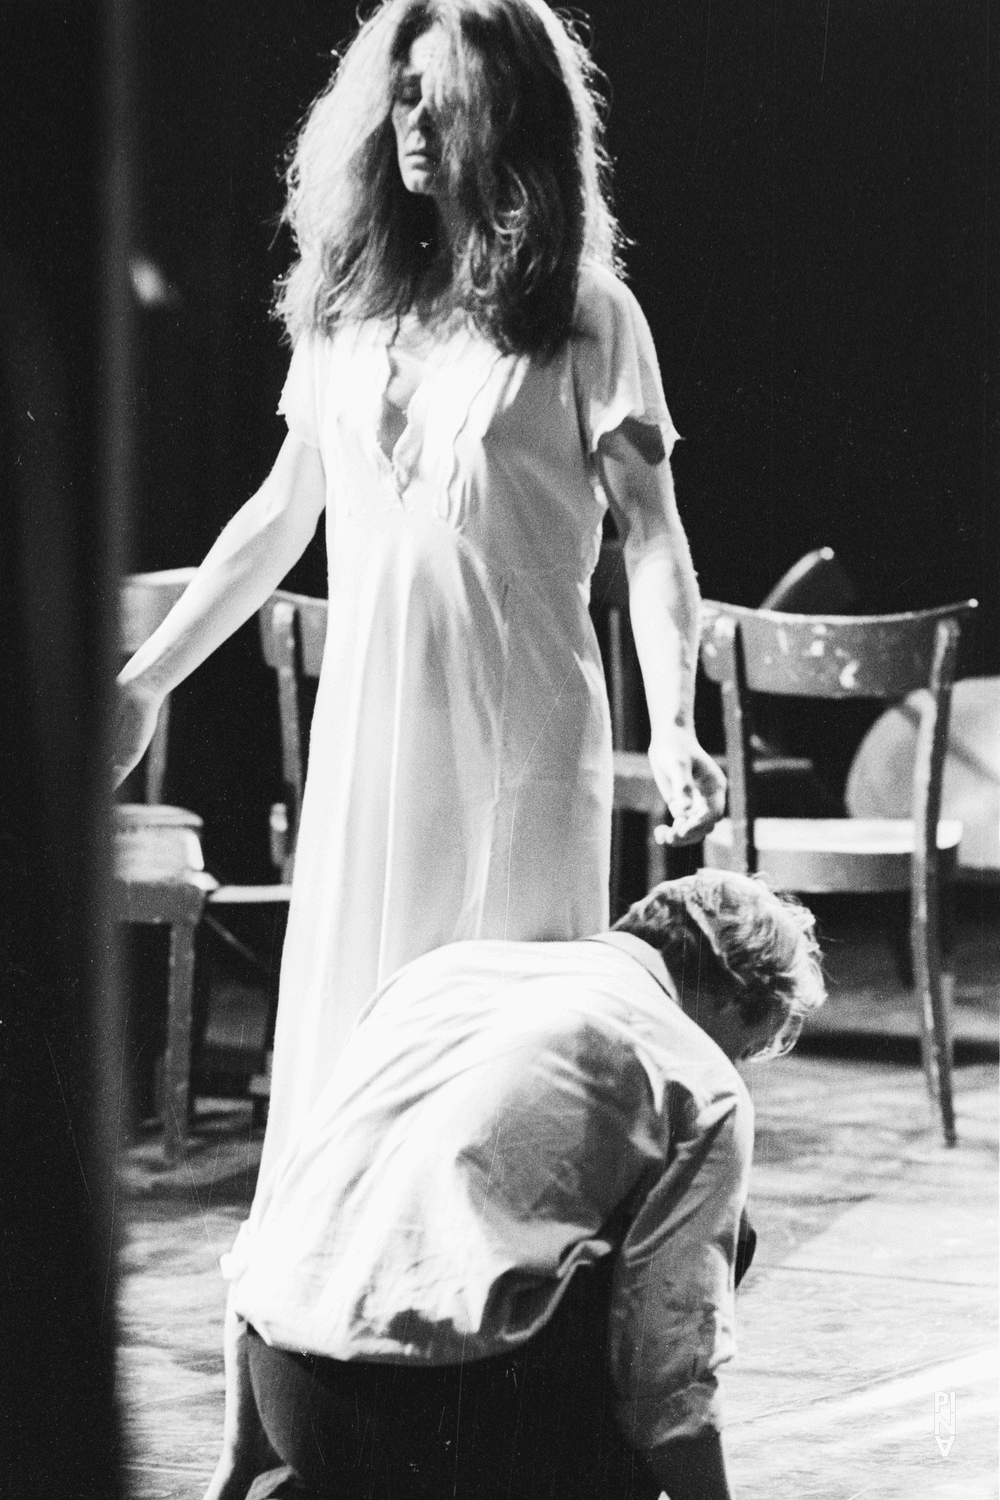 Dominique Mercy and Malou Airaudo in “Café Müller” by Pina Bausch